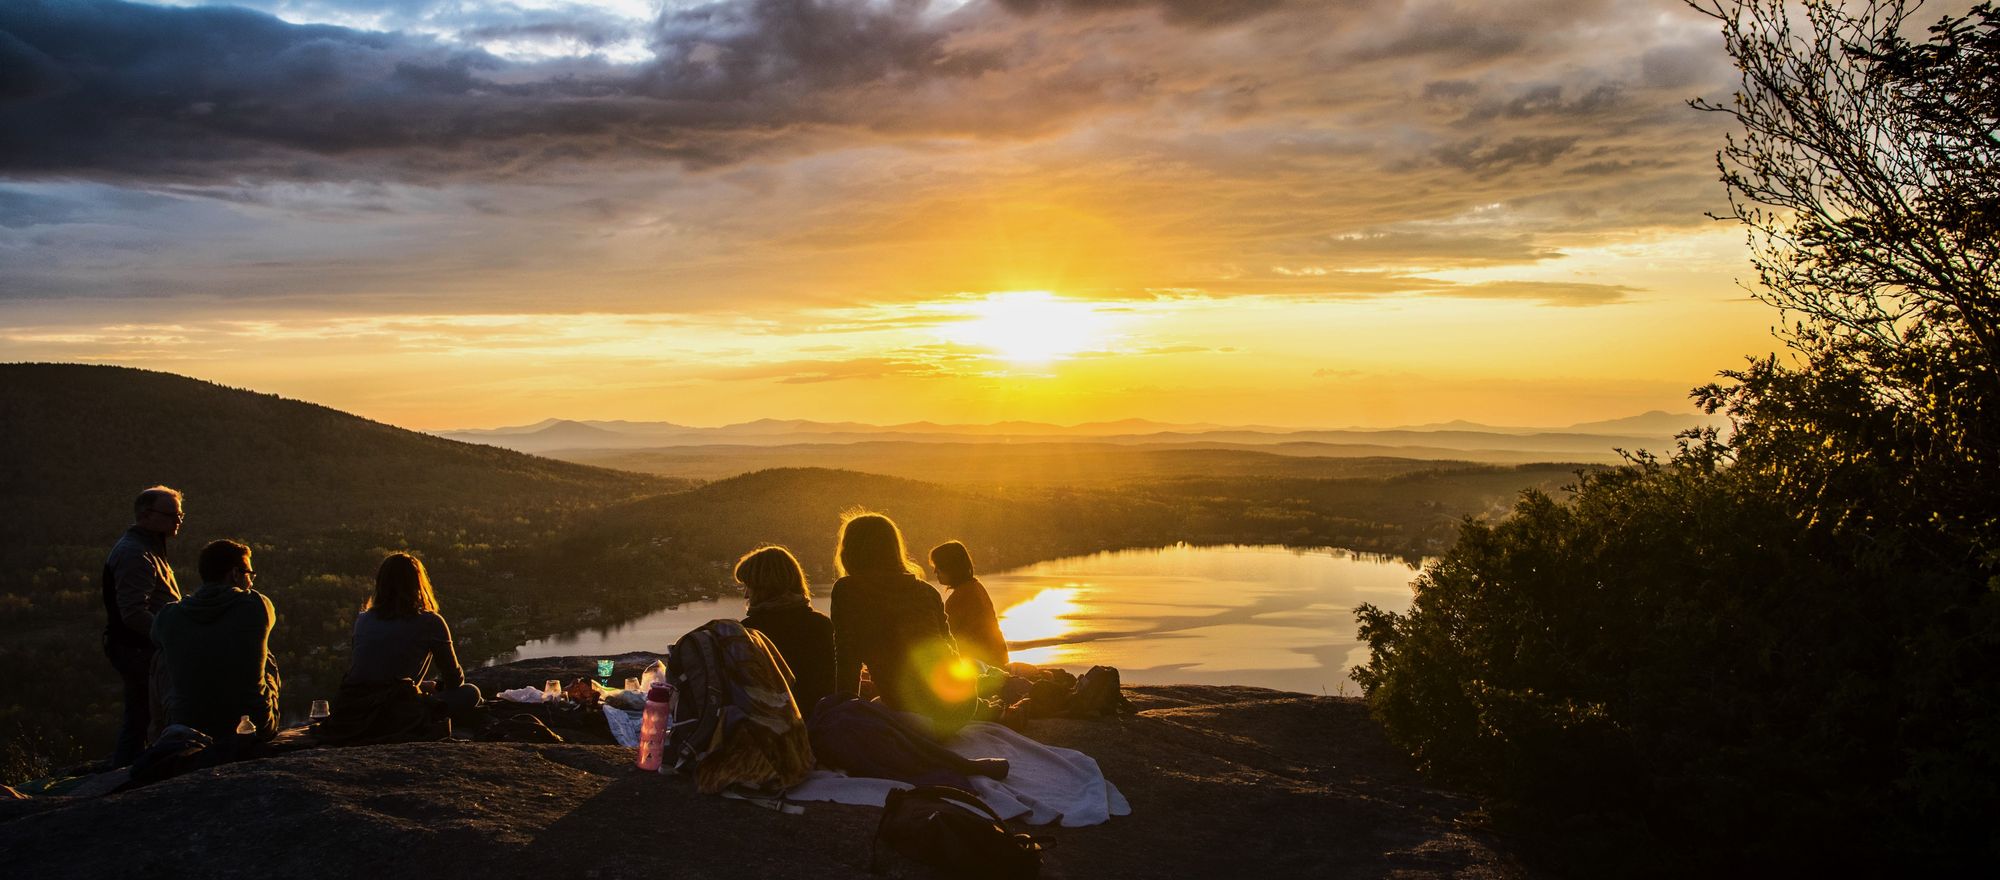 A group of people gathered on a hill watching the sun hiding under clouds behind a mountains and lake landscape